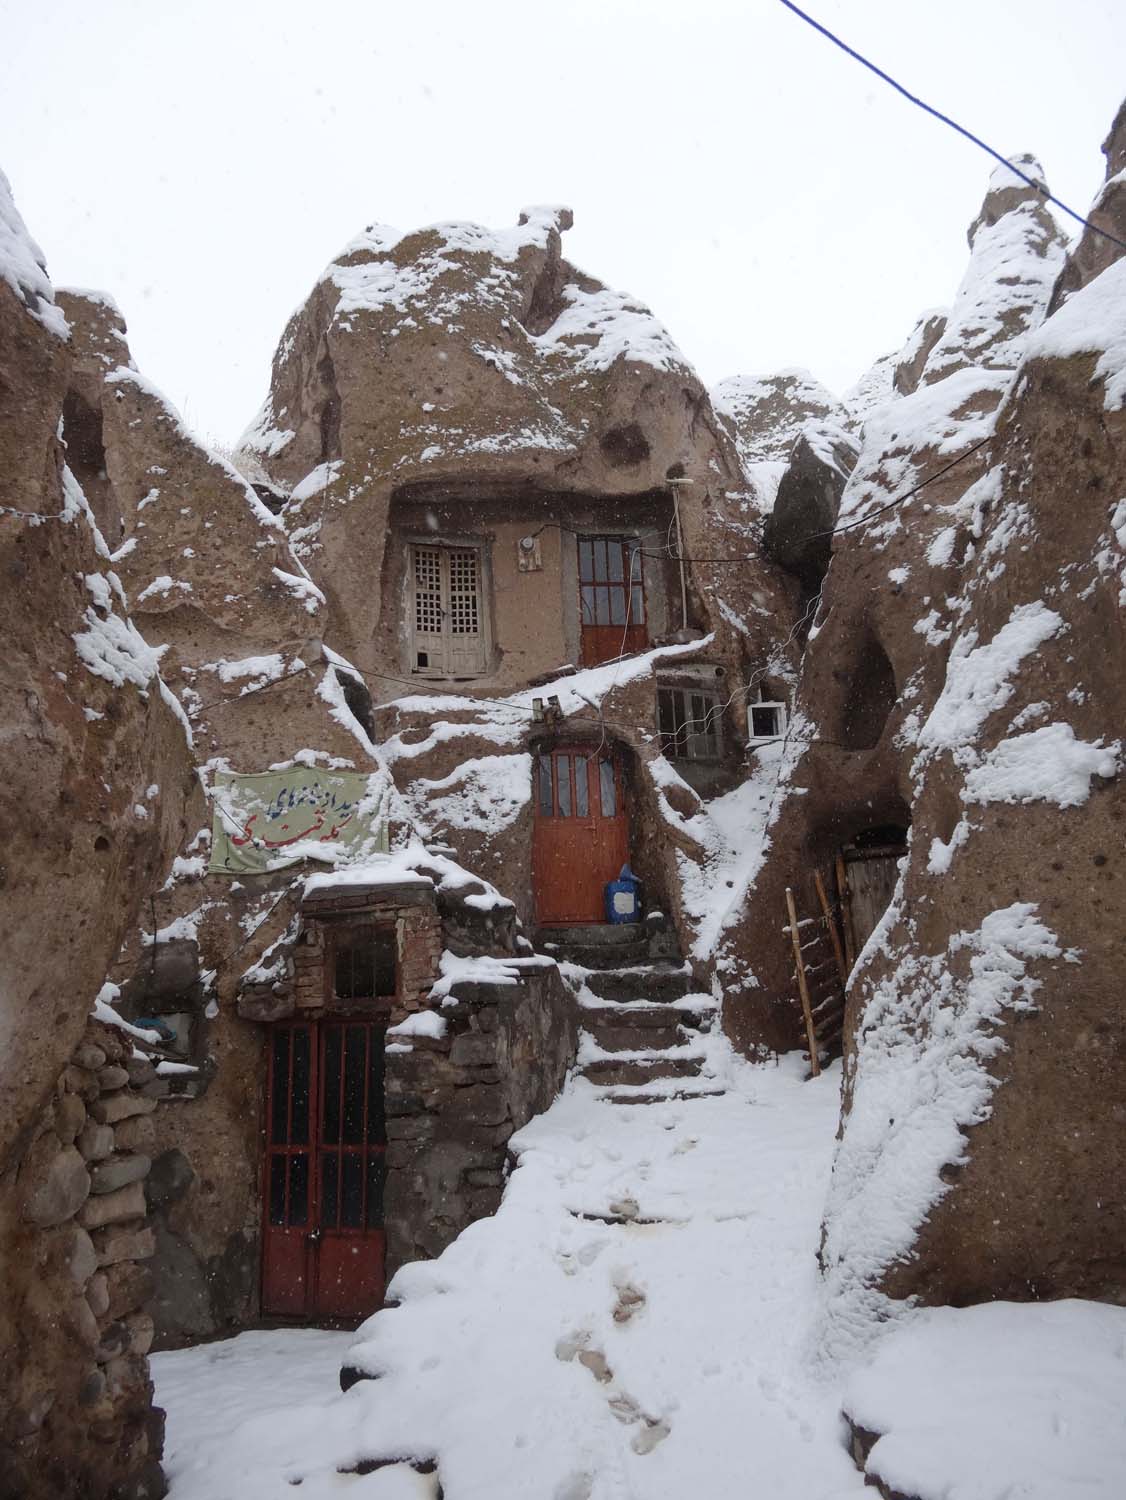 snow in Kandovan where they still live in homes made in caves